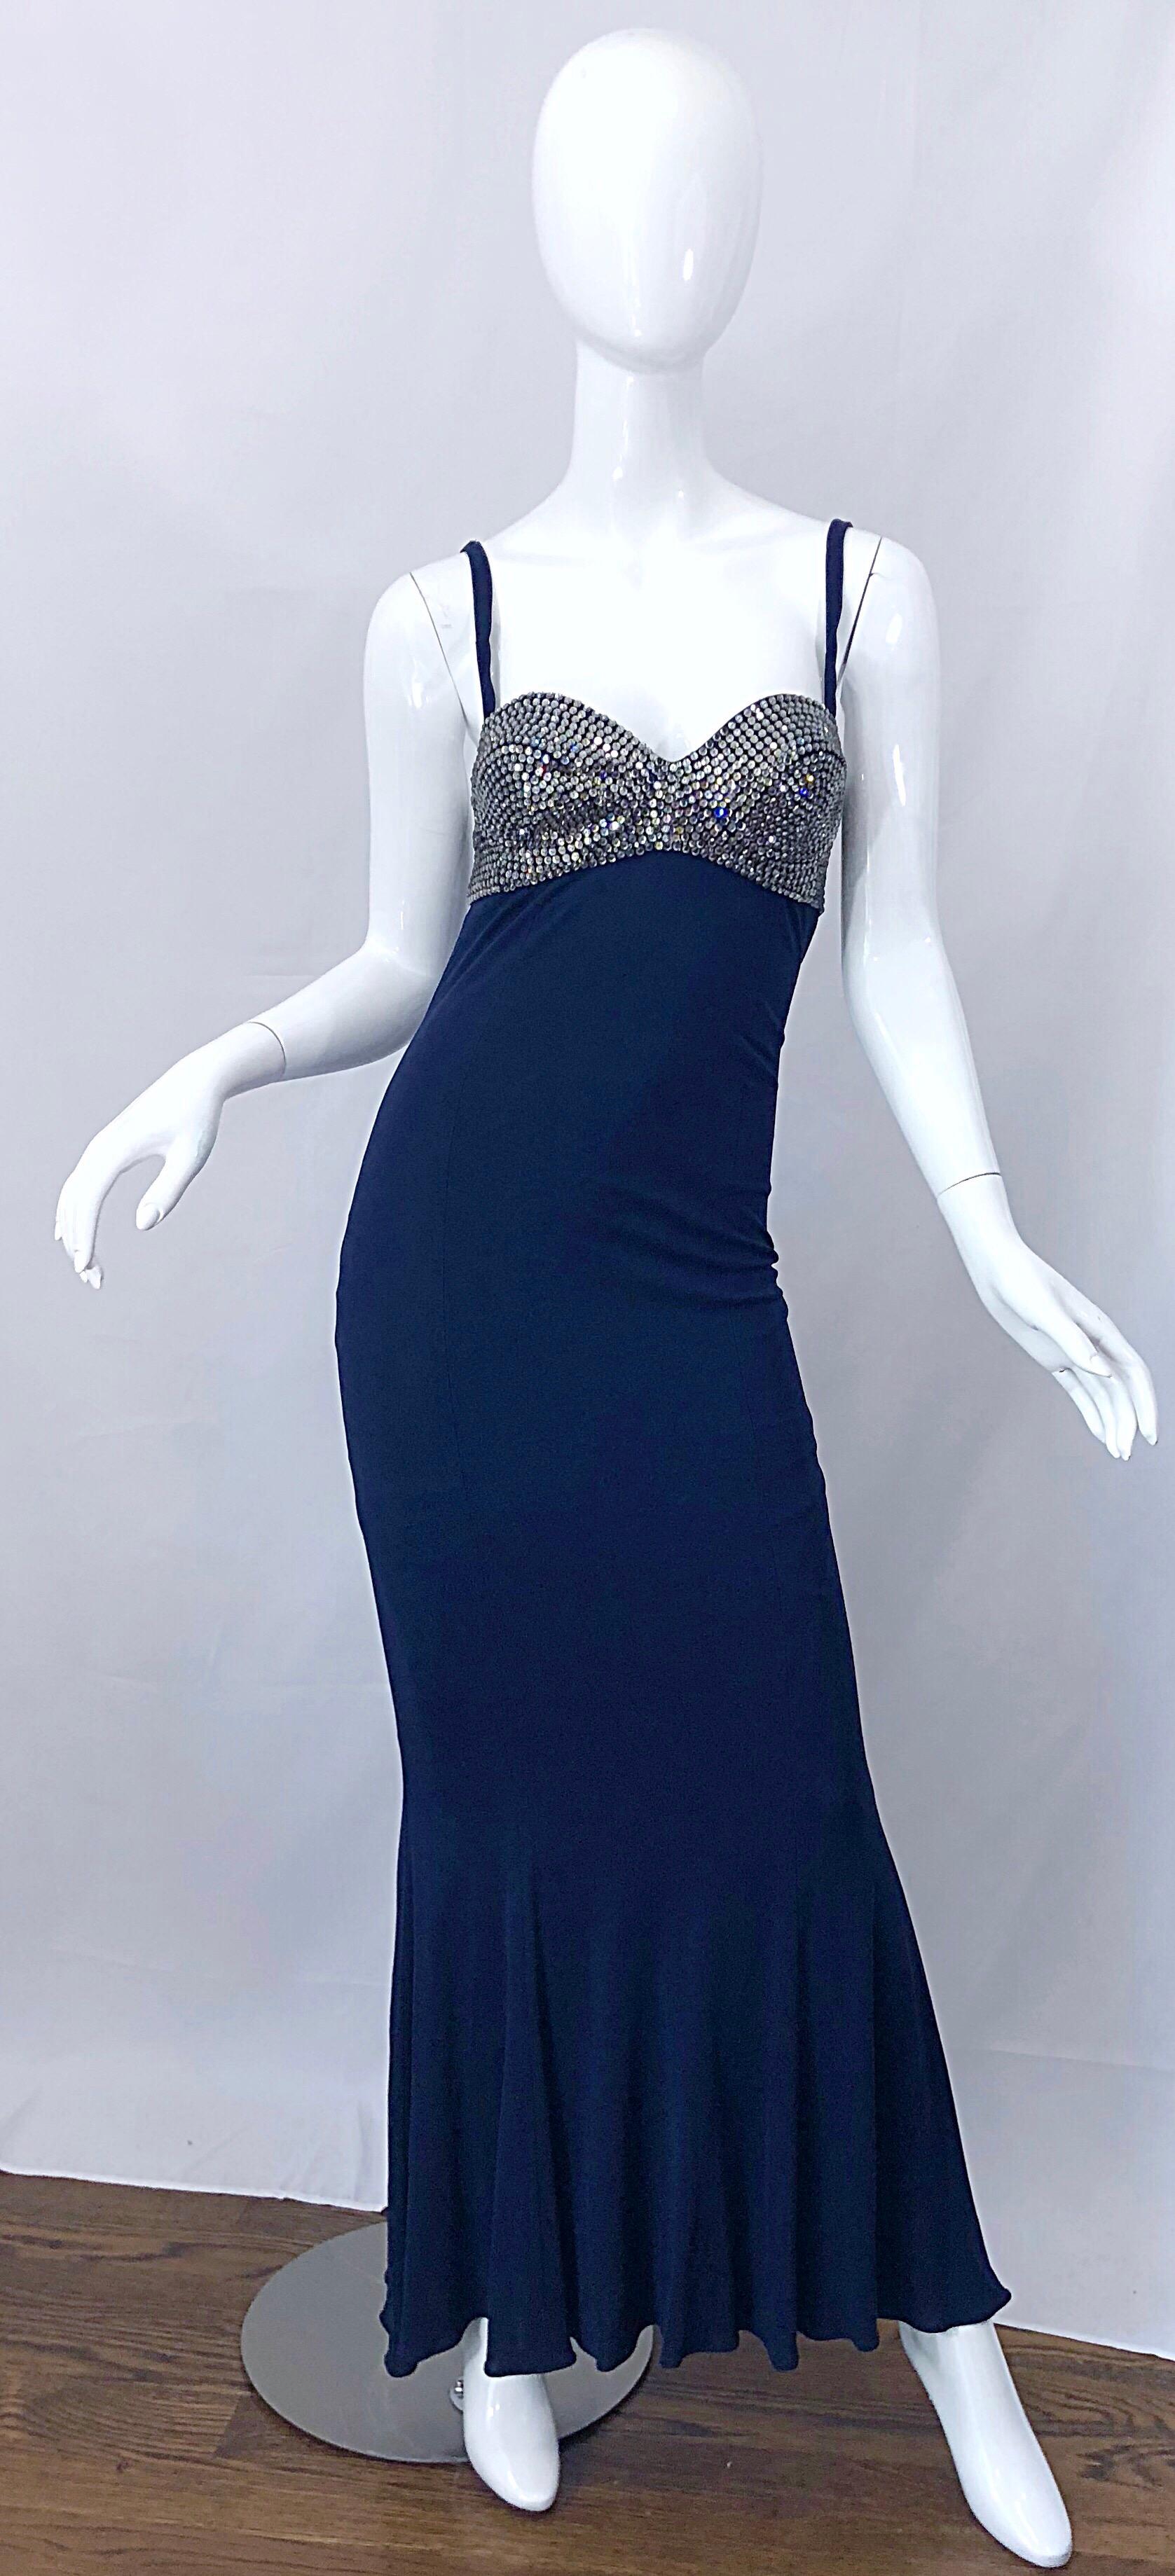 Absolutely stunning 90s PAMELA DENNIS for BERGDORF GOODMAN navy blue rhinestone bra evening dress! This gown features so much detail, where the lines literally hug and flatter the body. Silver sequined rhinestones were hand-sewn onto the bra of the